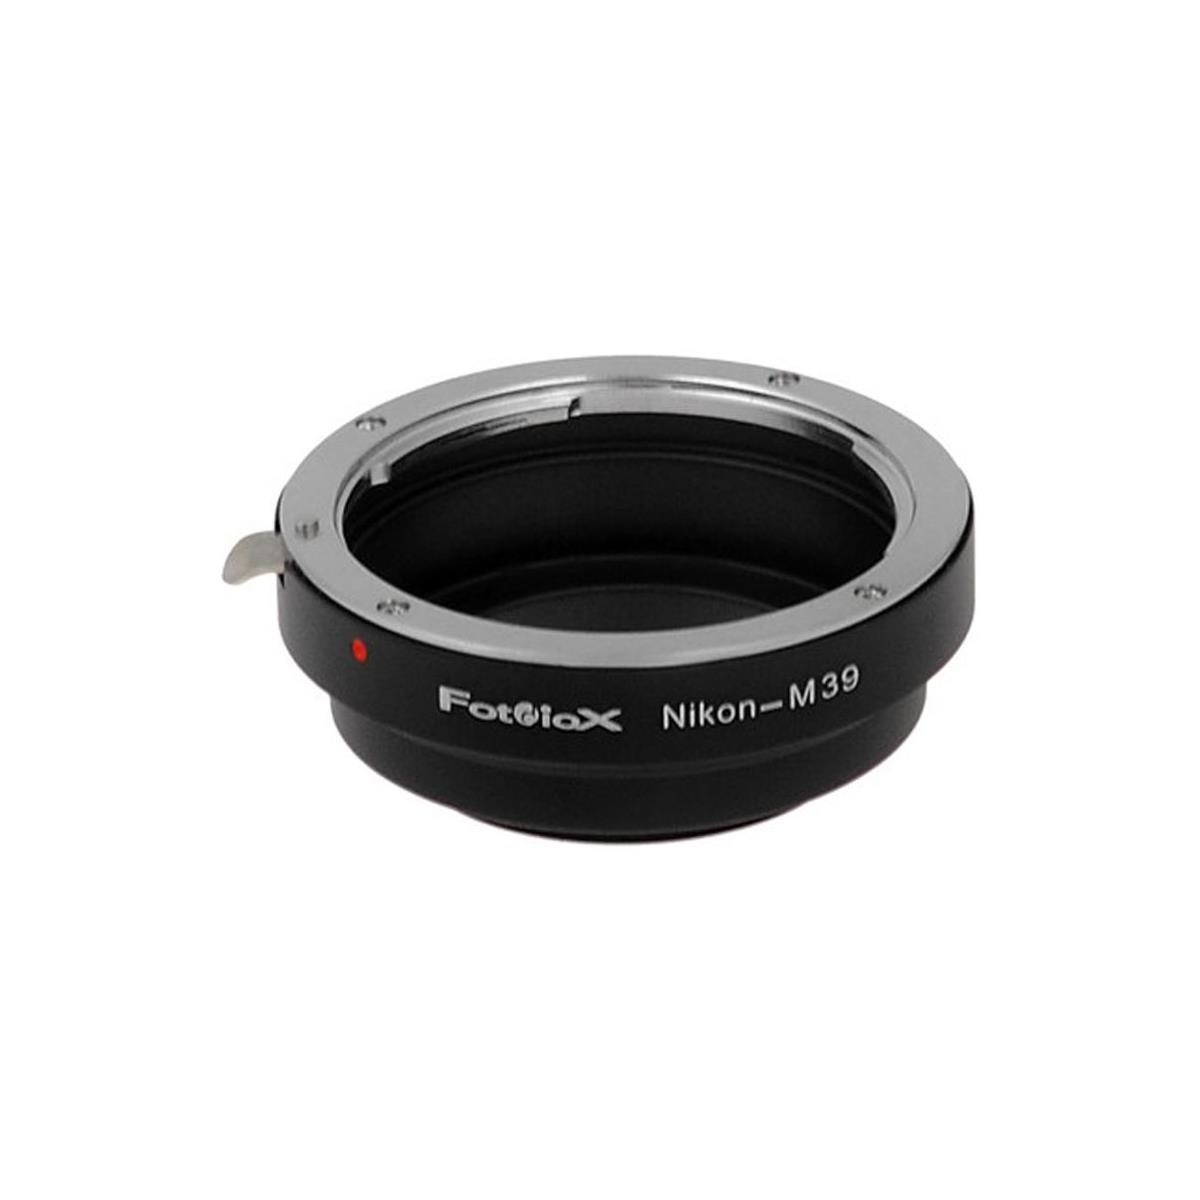 Image of Fotodiox Mount Adapter for Nikon Lens to Leica M39 Camera